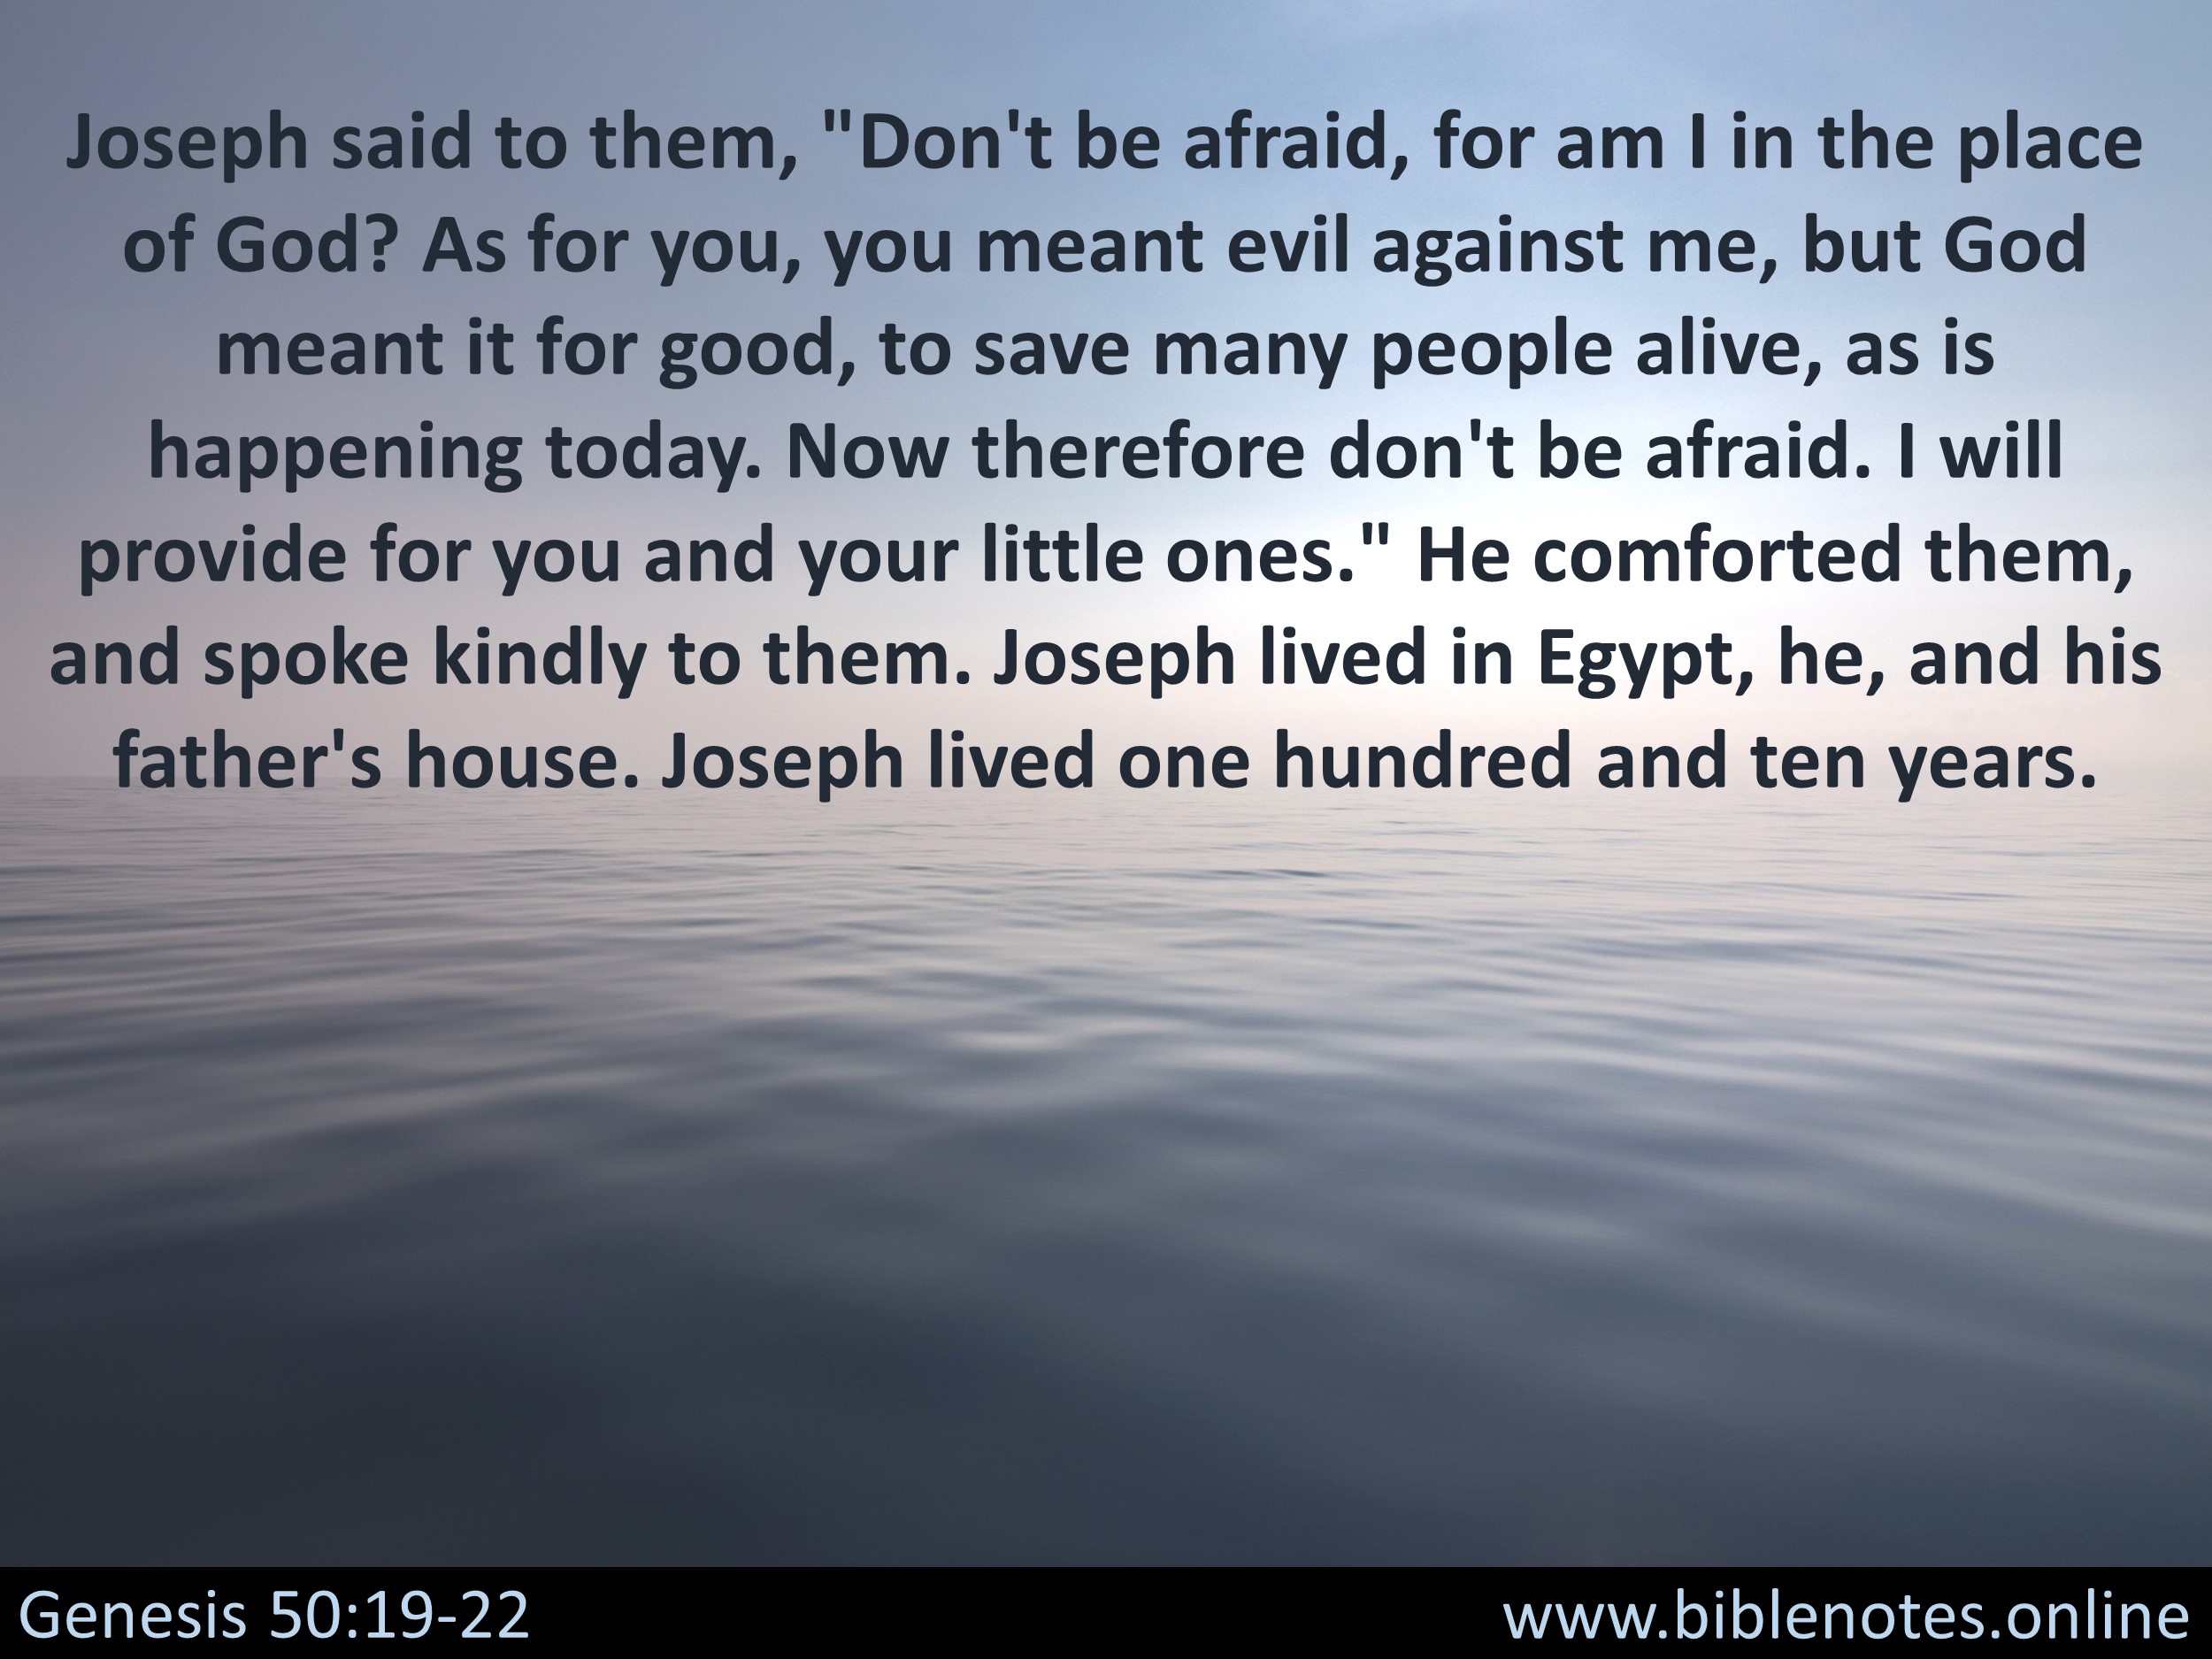 Bible Verse from Genesis Chapter 50